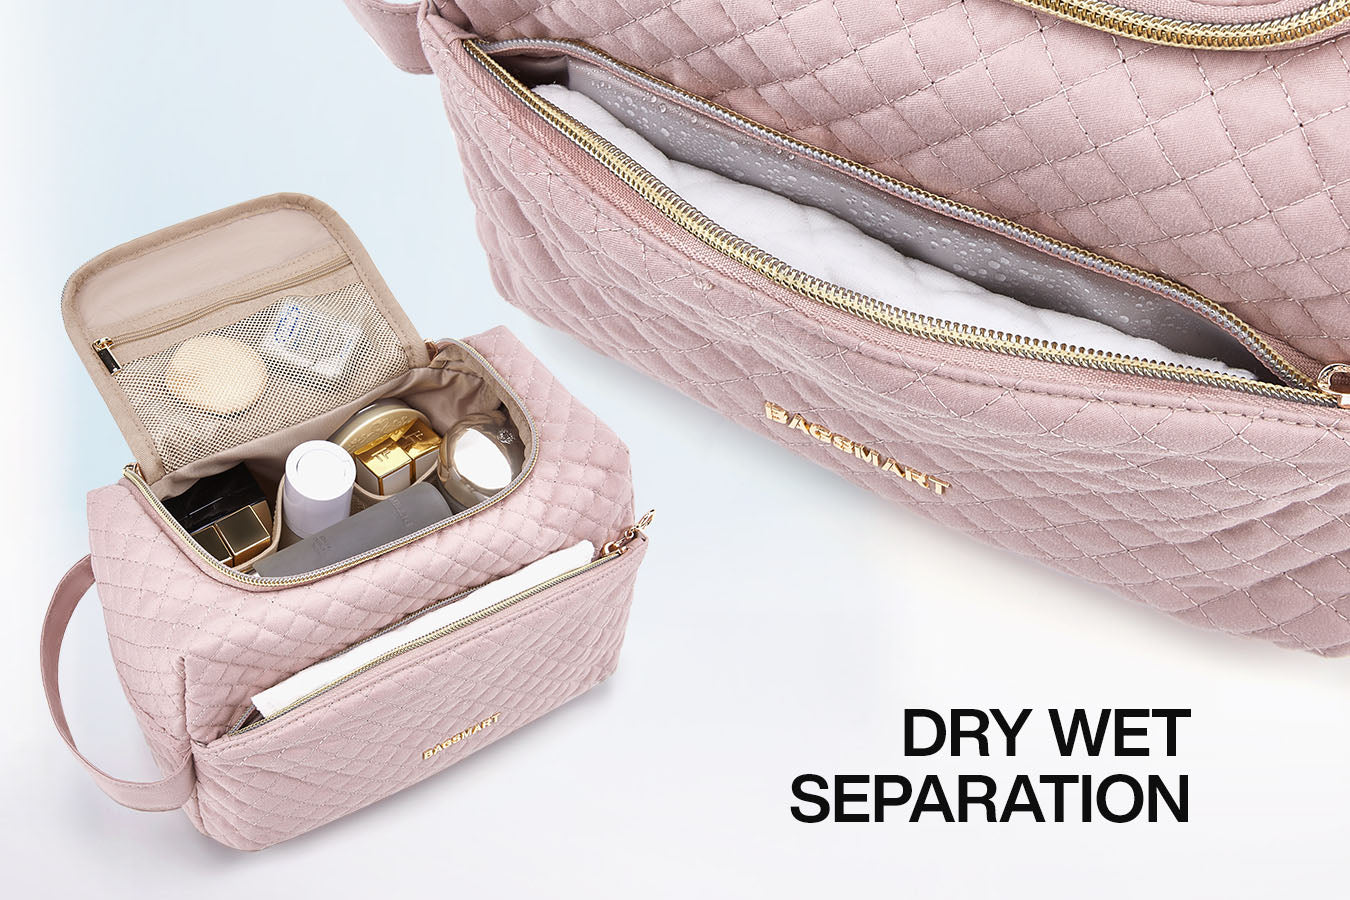 Odelia's TSA toiletry bag's water-resistant front pocket separates wet and dry essentials